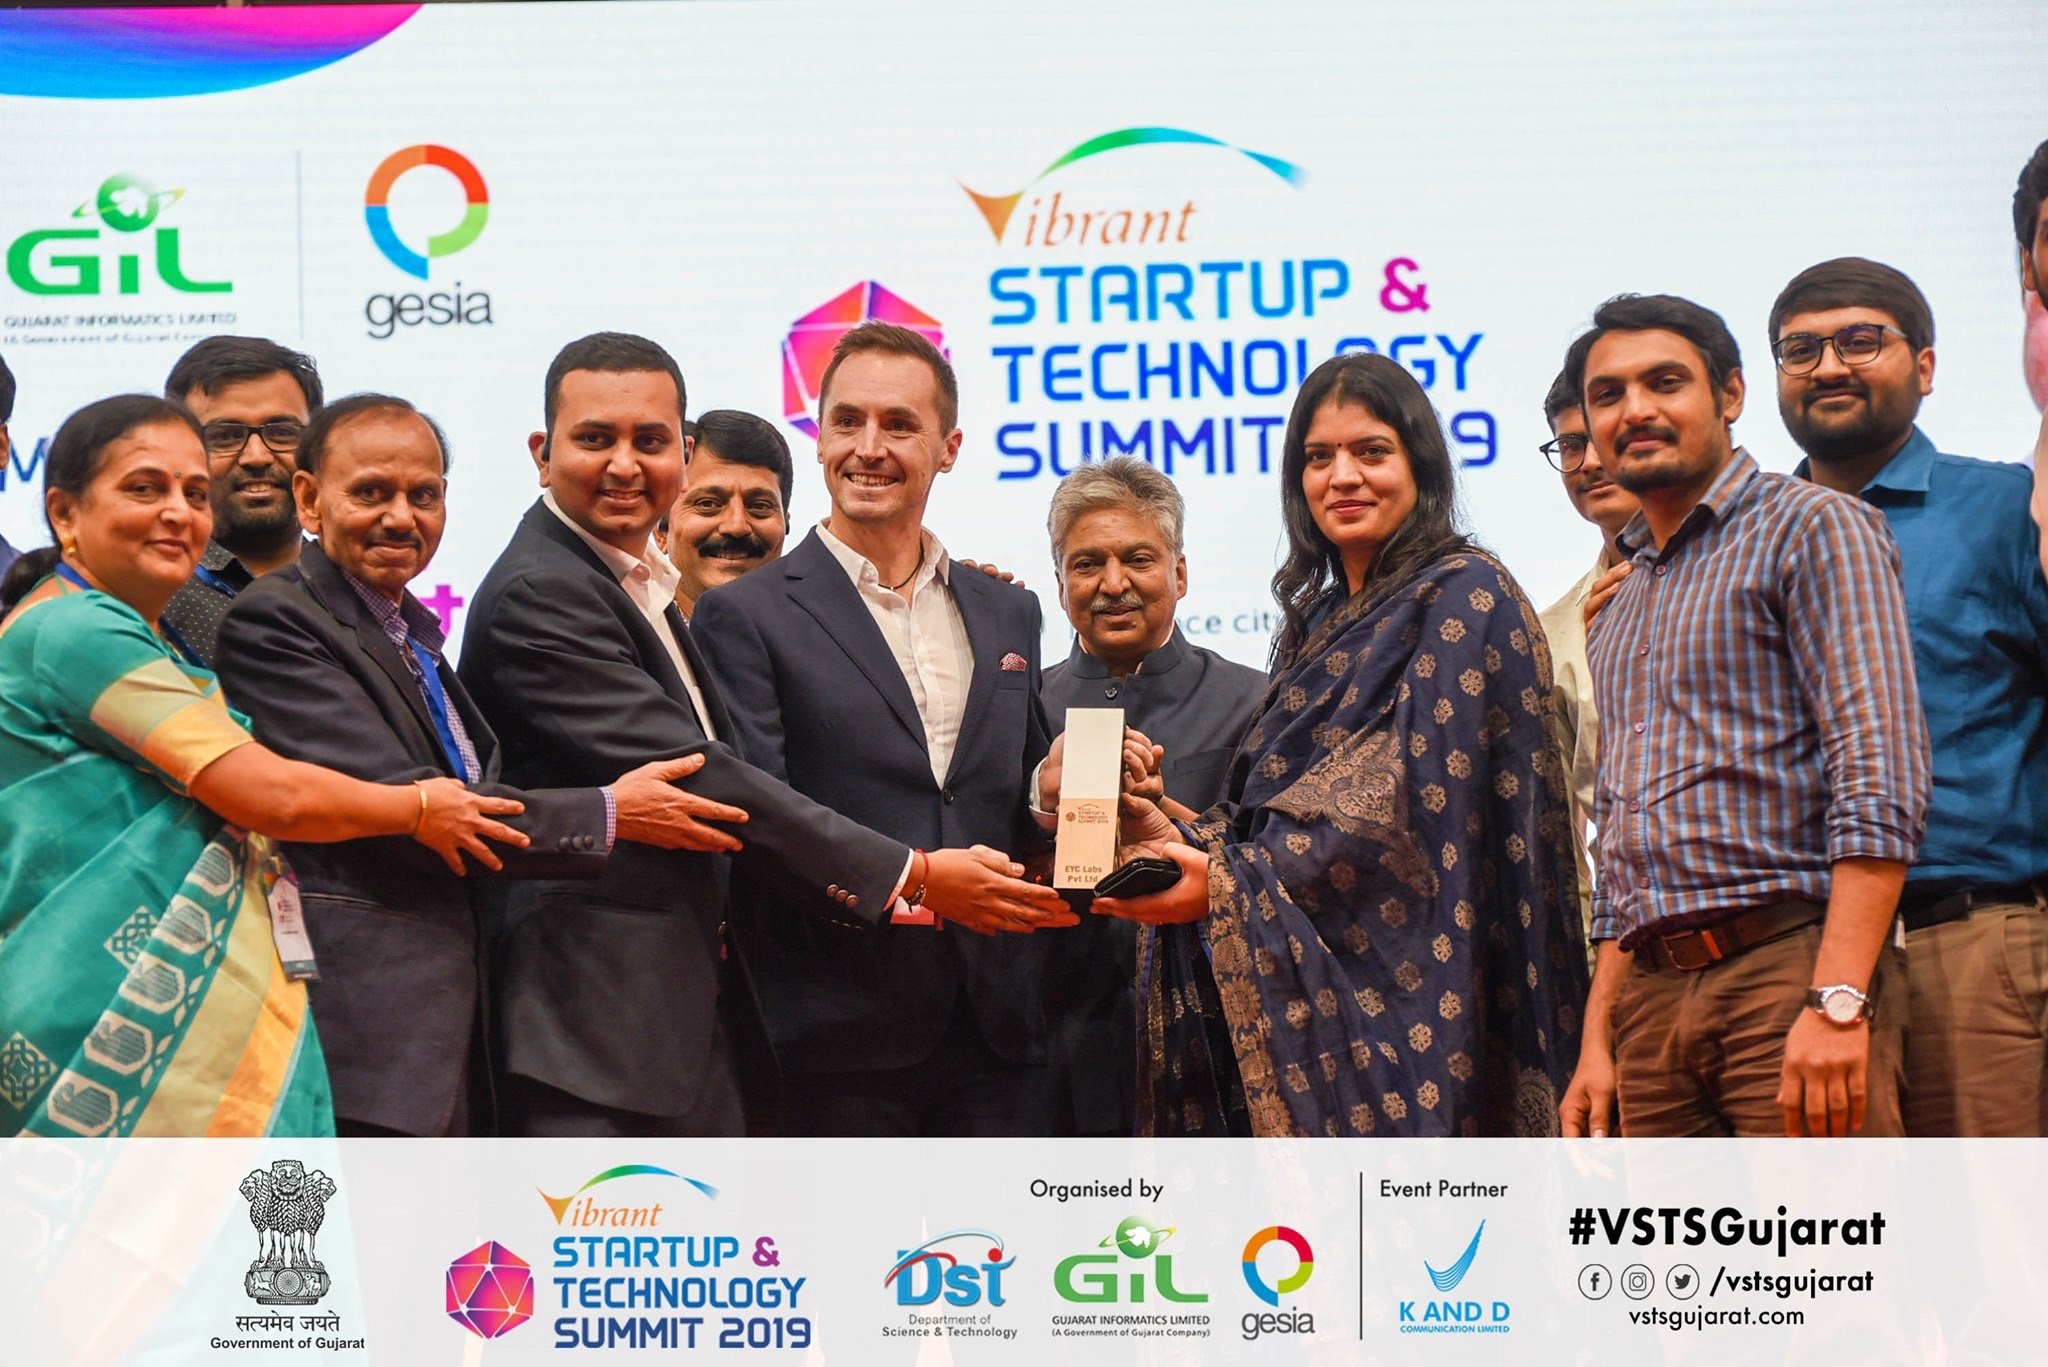 IoT Startup of the Year